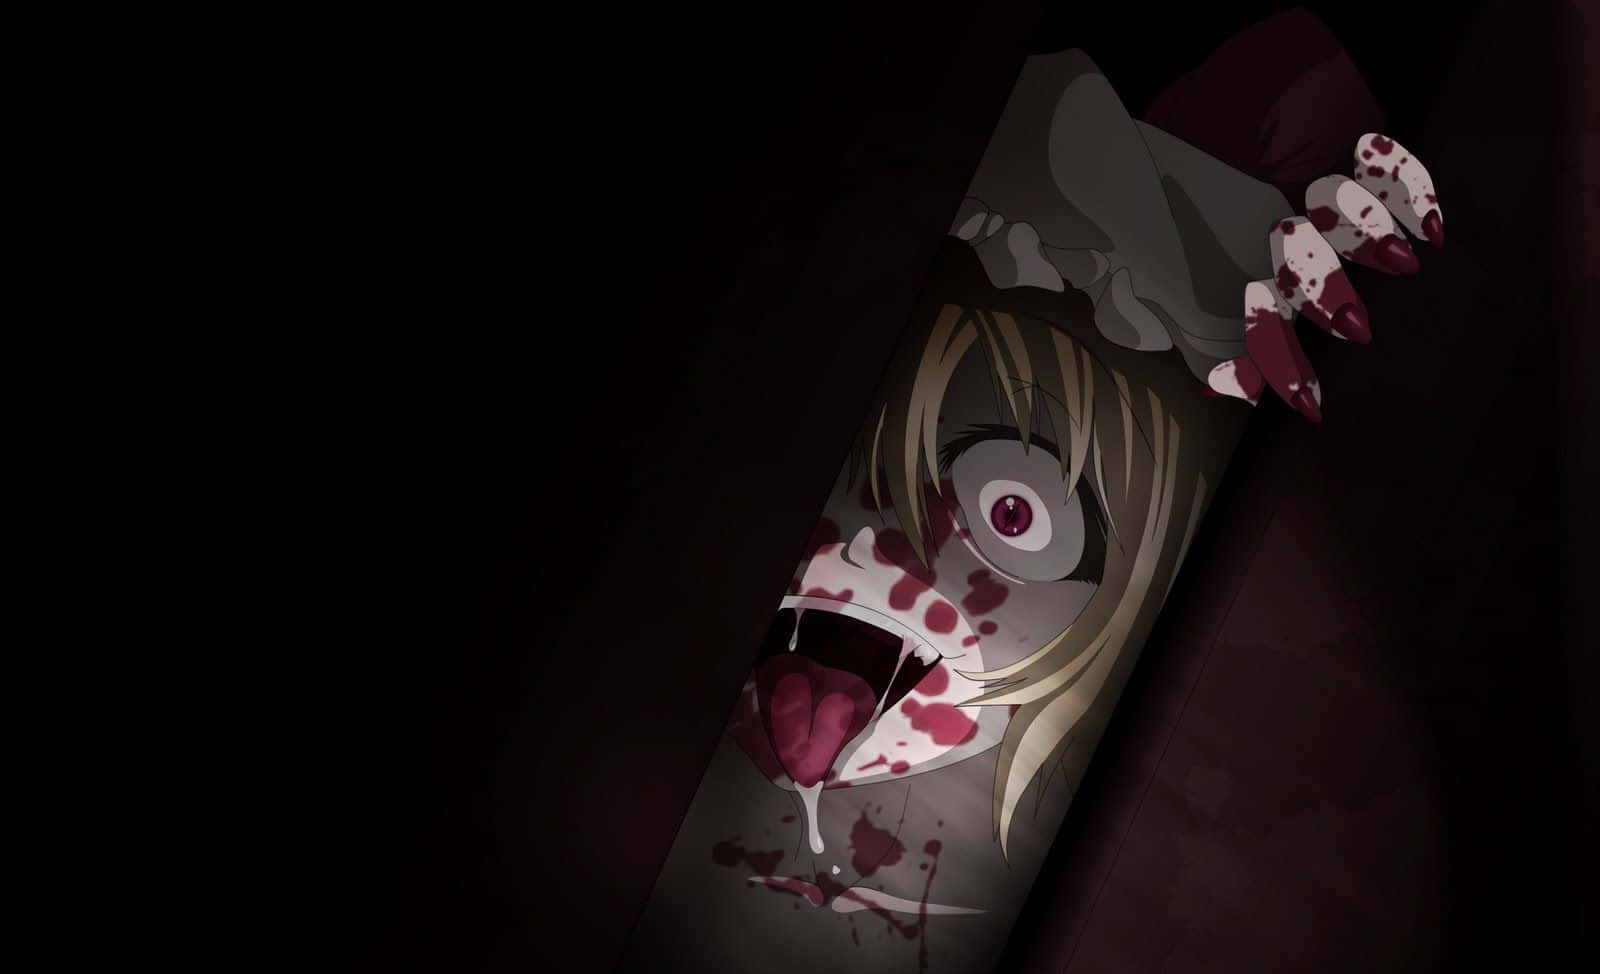 Be prepared to face your darkest nightmares with the horror of anime Wallpaper